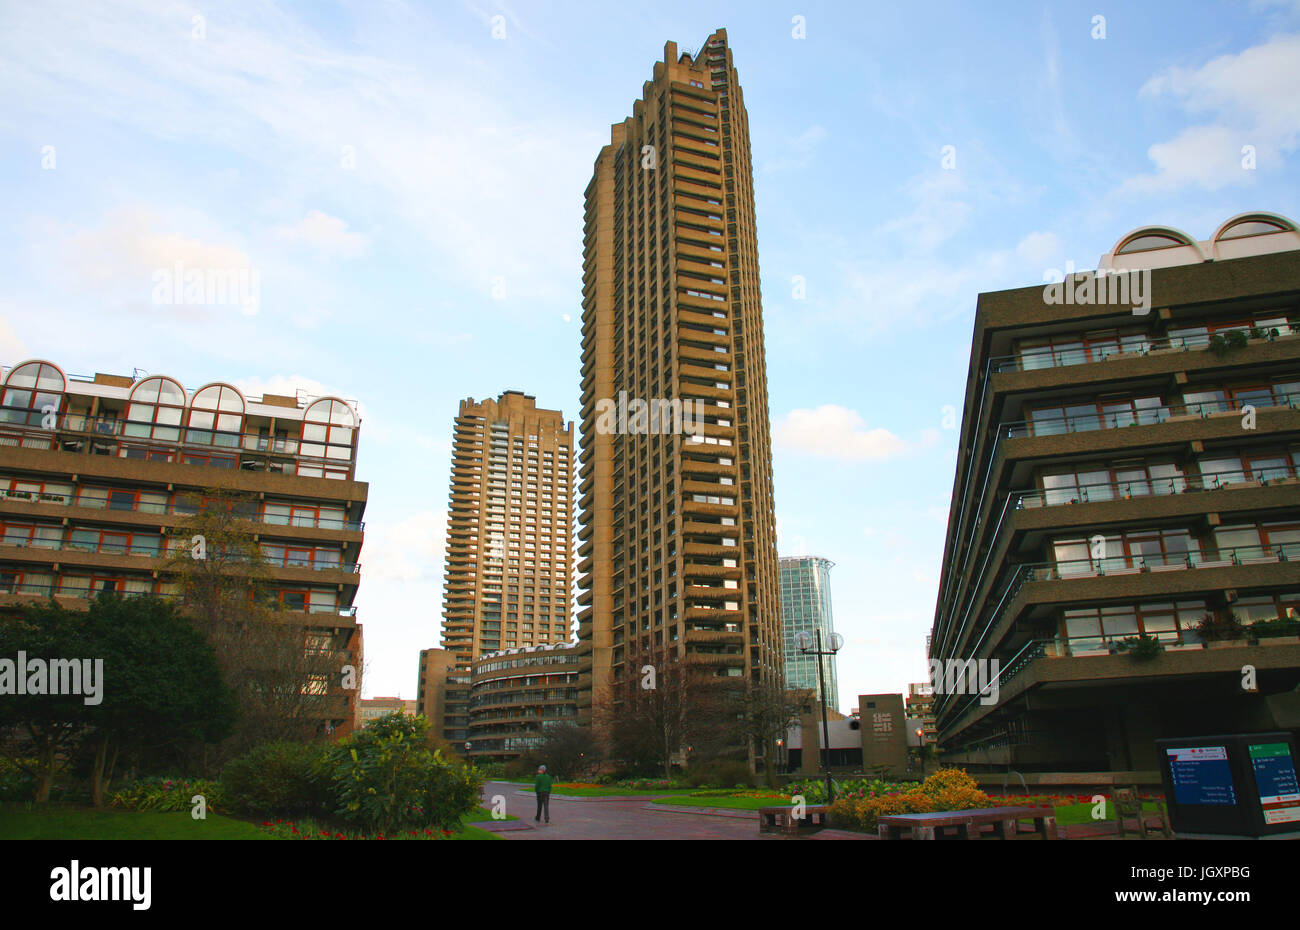 London , UK - February 14, 2011: Outside view of Barbican Center, largest performing arts centre in Europe, designed by Chamberlin, Powell and Bon, op Stock Photo